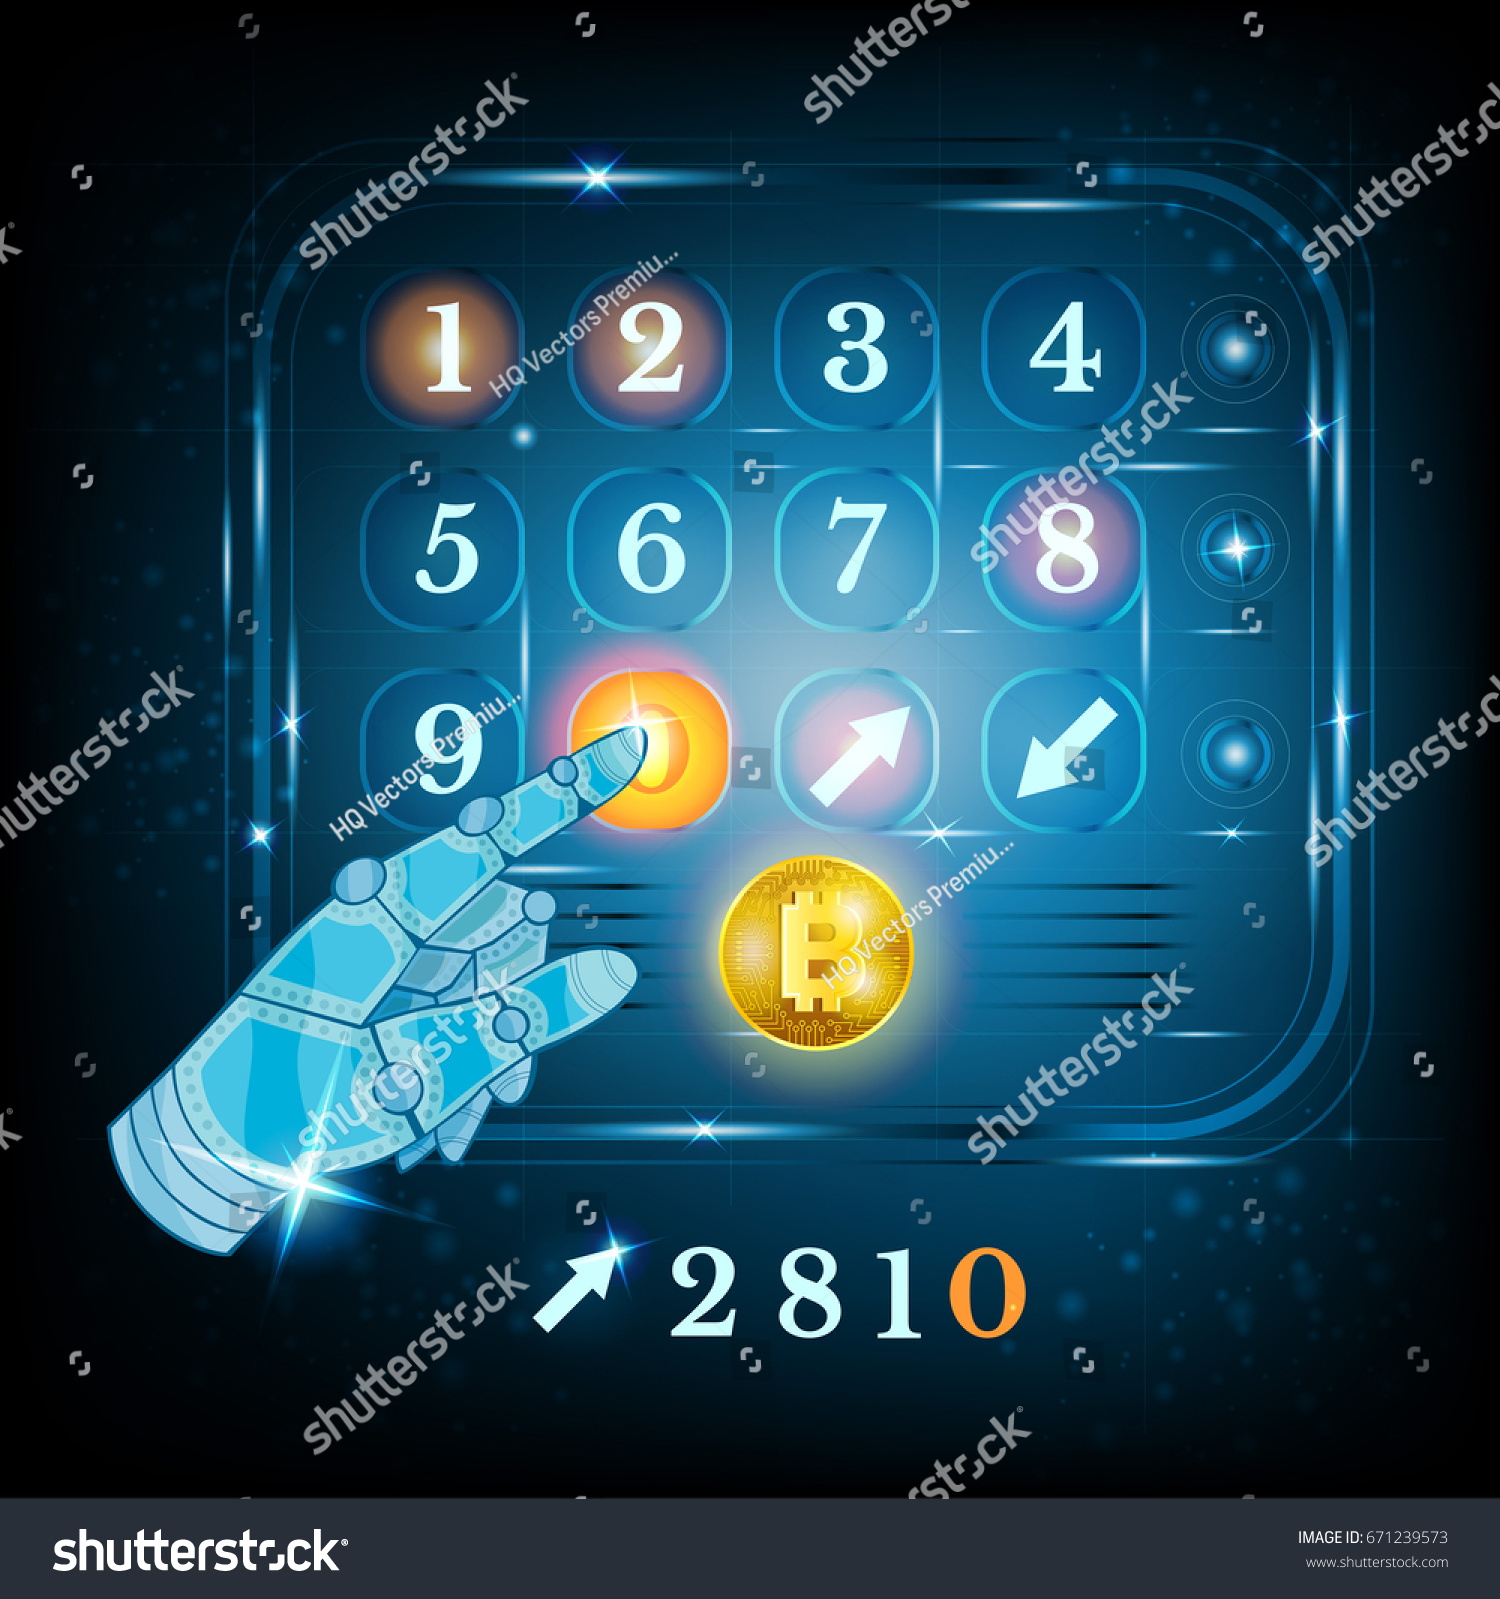 SVG of Virtual keyboard or keypad for bit coin rates with hand pointer svg